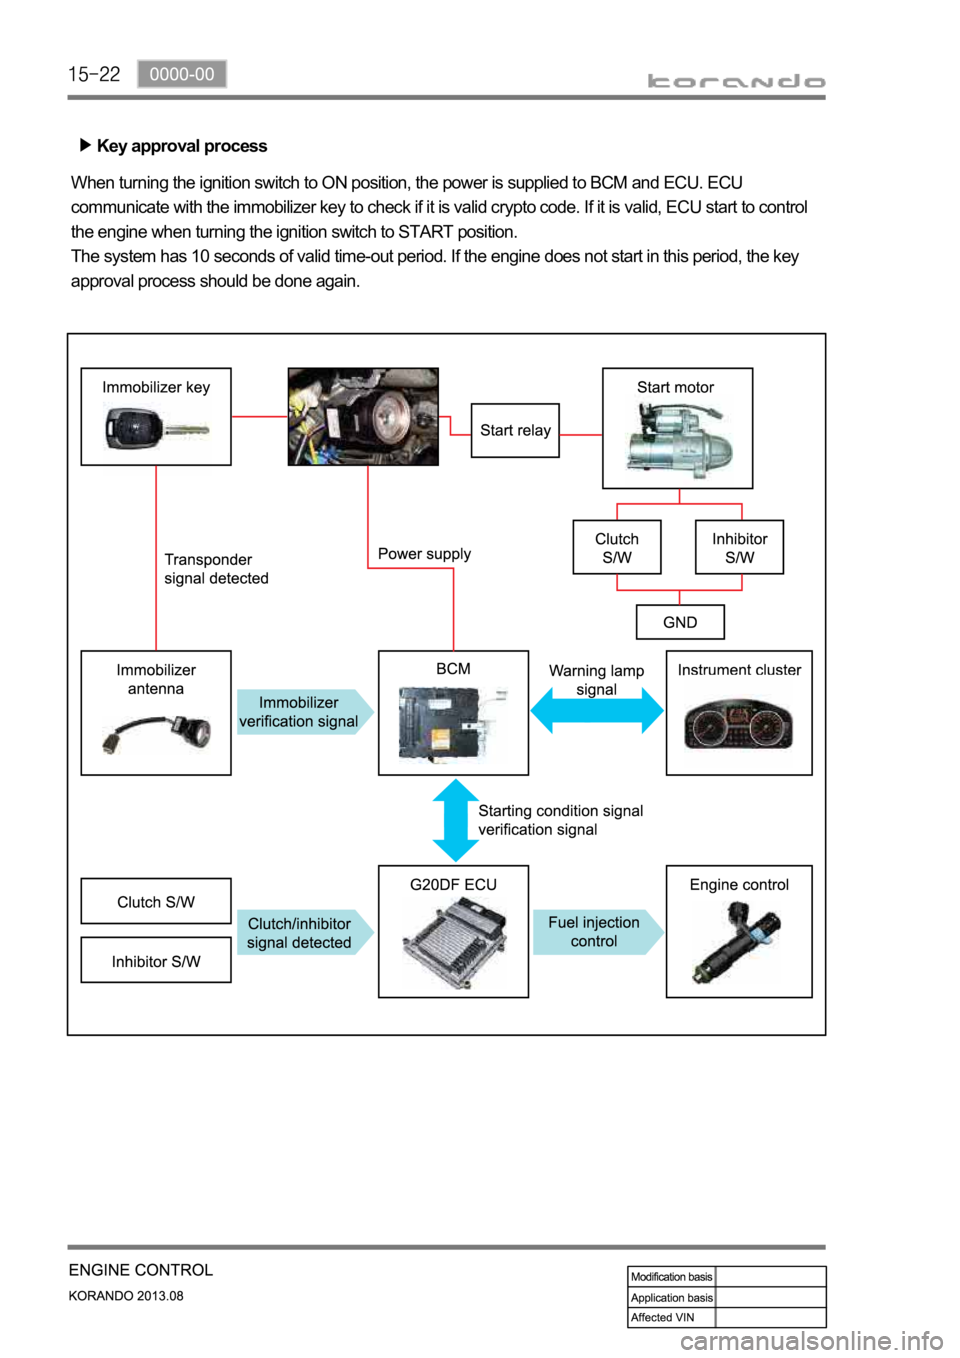 SSANGYONG KORANDO 2013  Service Manual Key approval process
When turning the ignition switch to ON position, the power is supplied to BCM and ECU. ECU 
communicate with the immobilizer key to check if it is valid crypto code. If it is vali